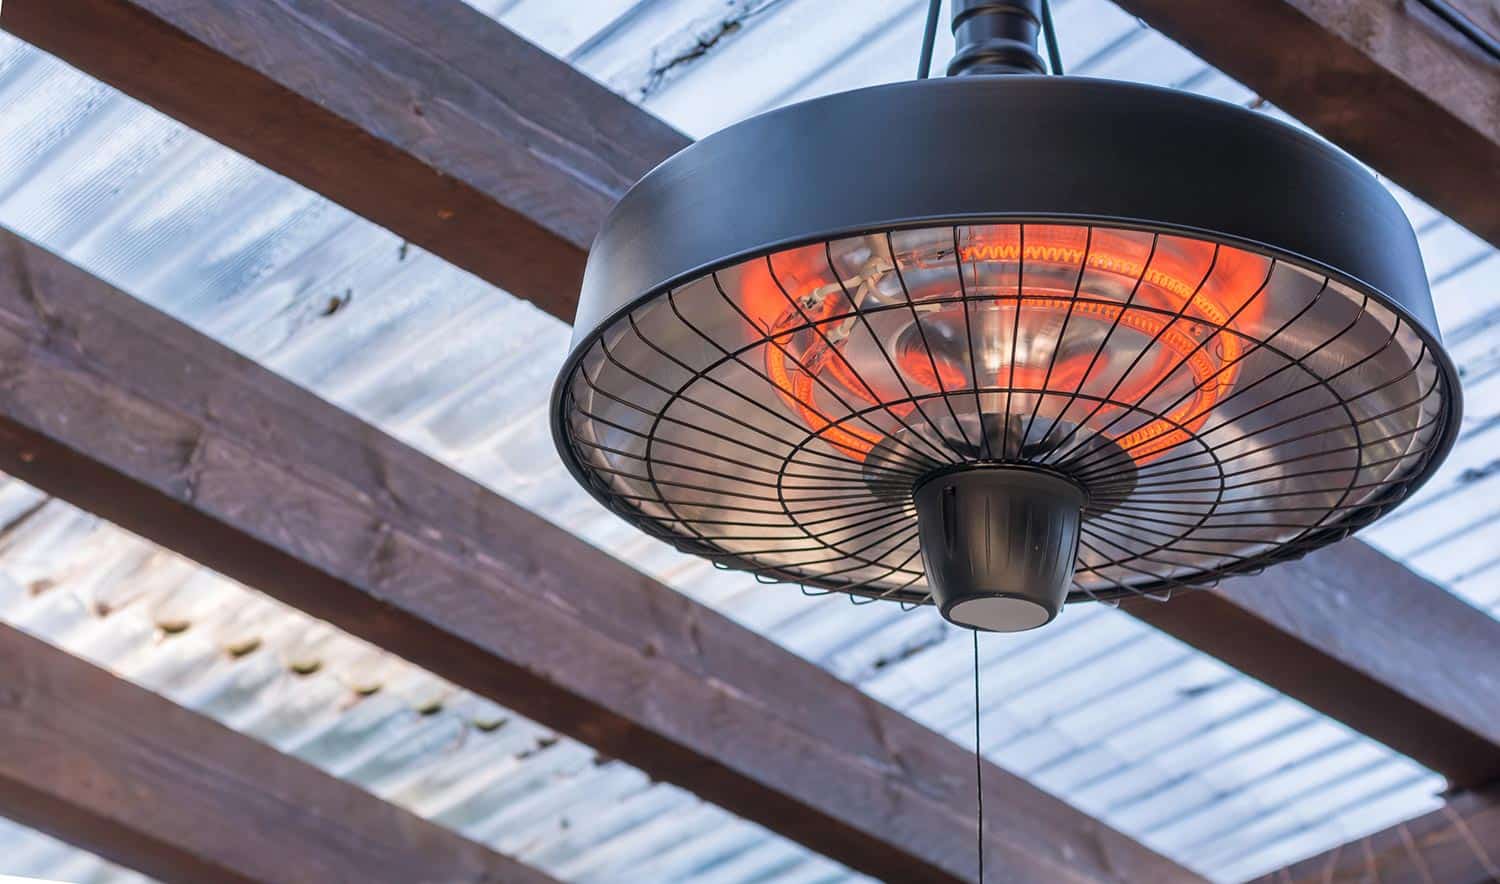 Radiant heater on the ceiling of a terrace roofing